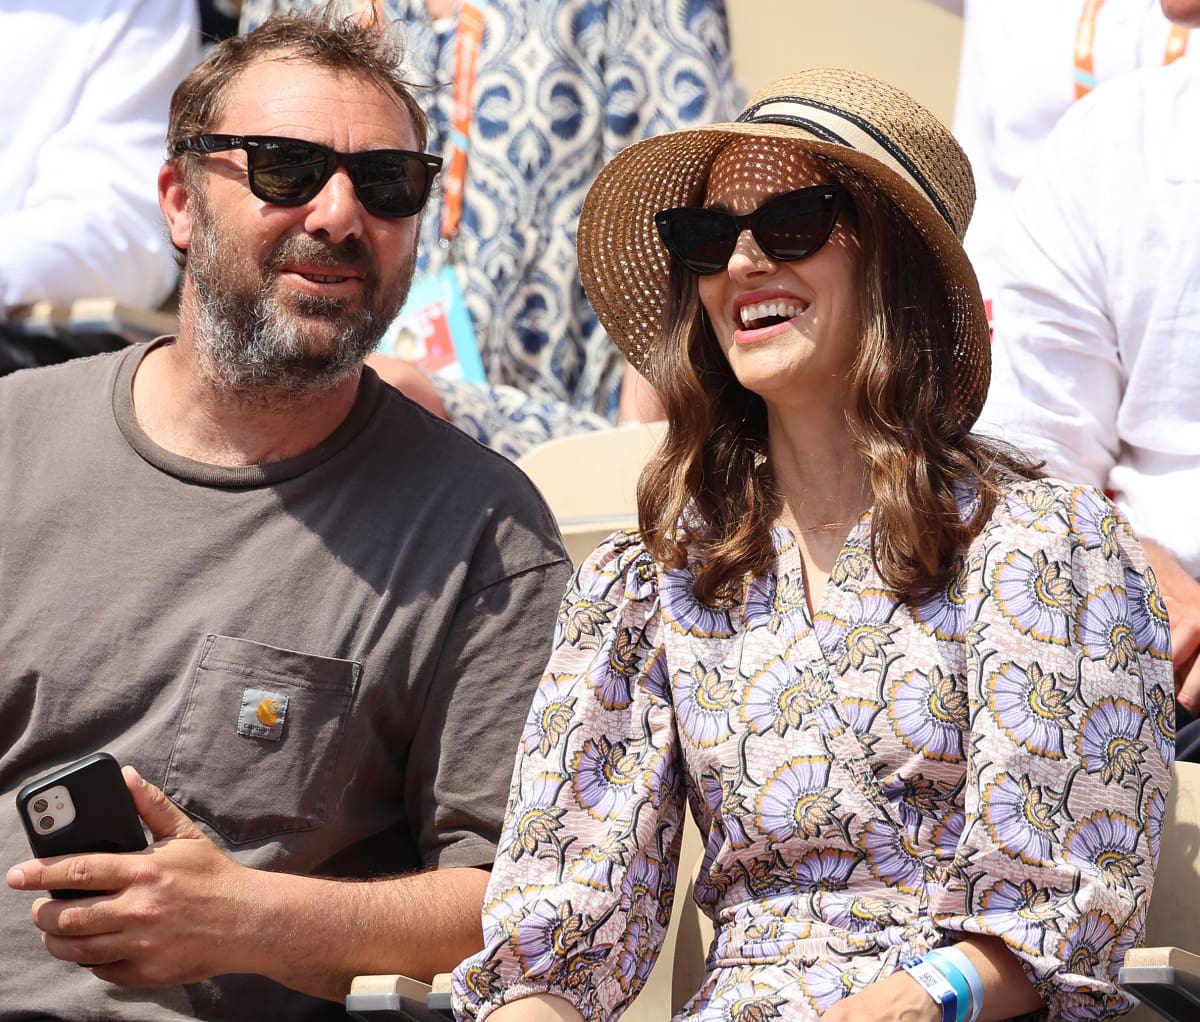 Natalie Portman was all smiles while watching the tennis match during the French Open in Paris